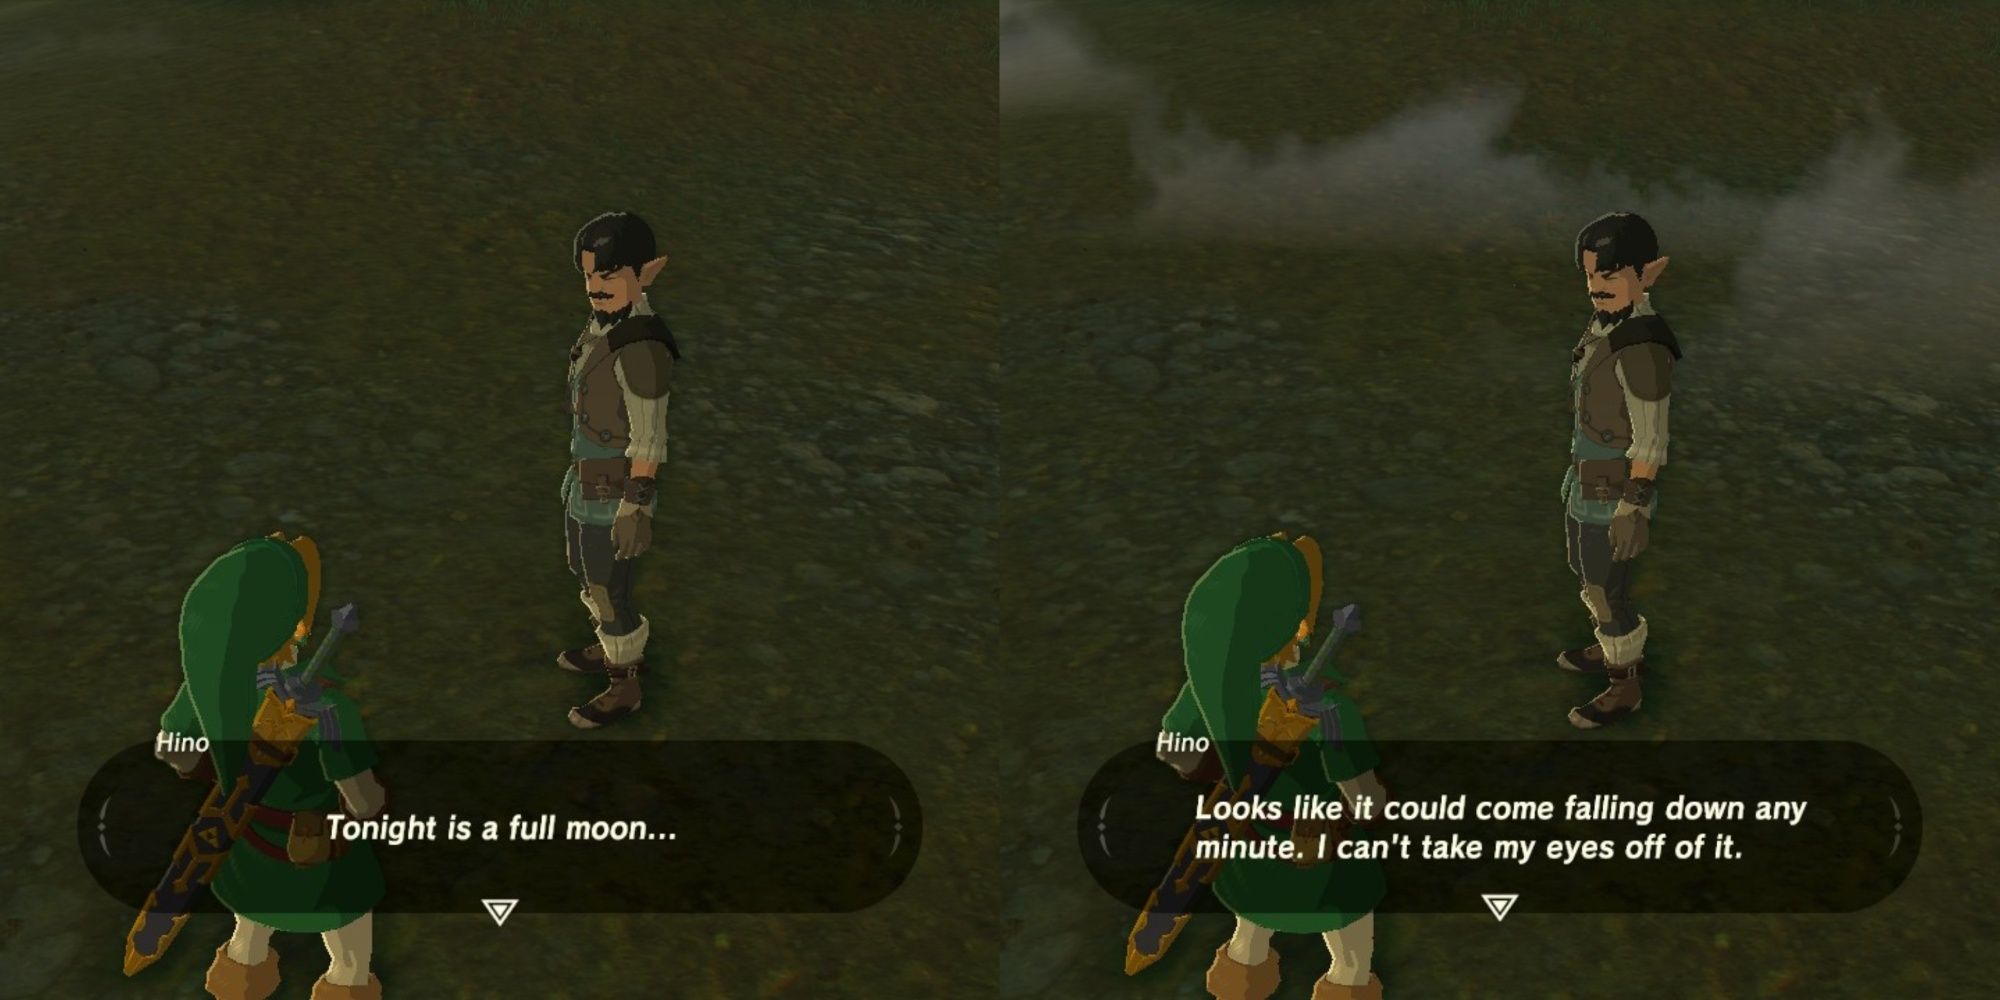 Split images of Link speaking to Hino who tells him about the full moon in BOTW